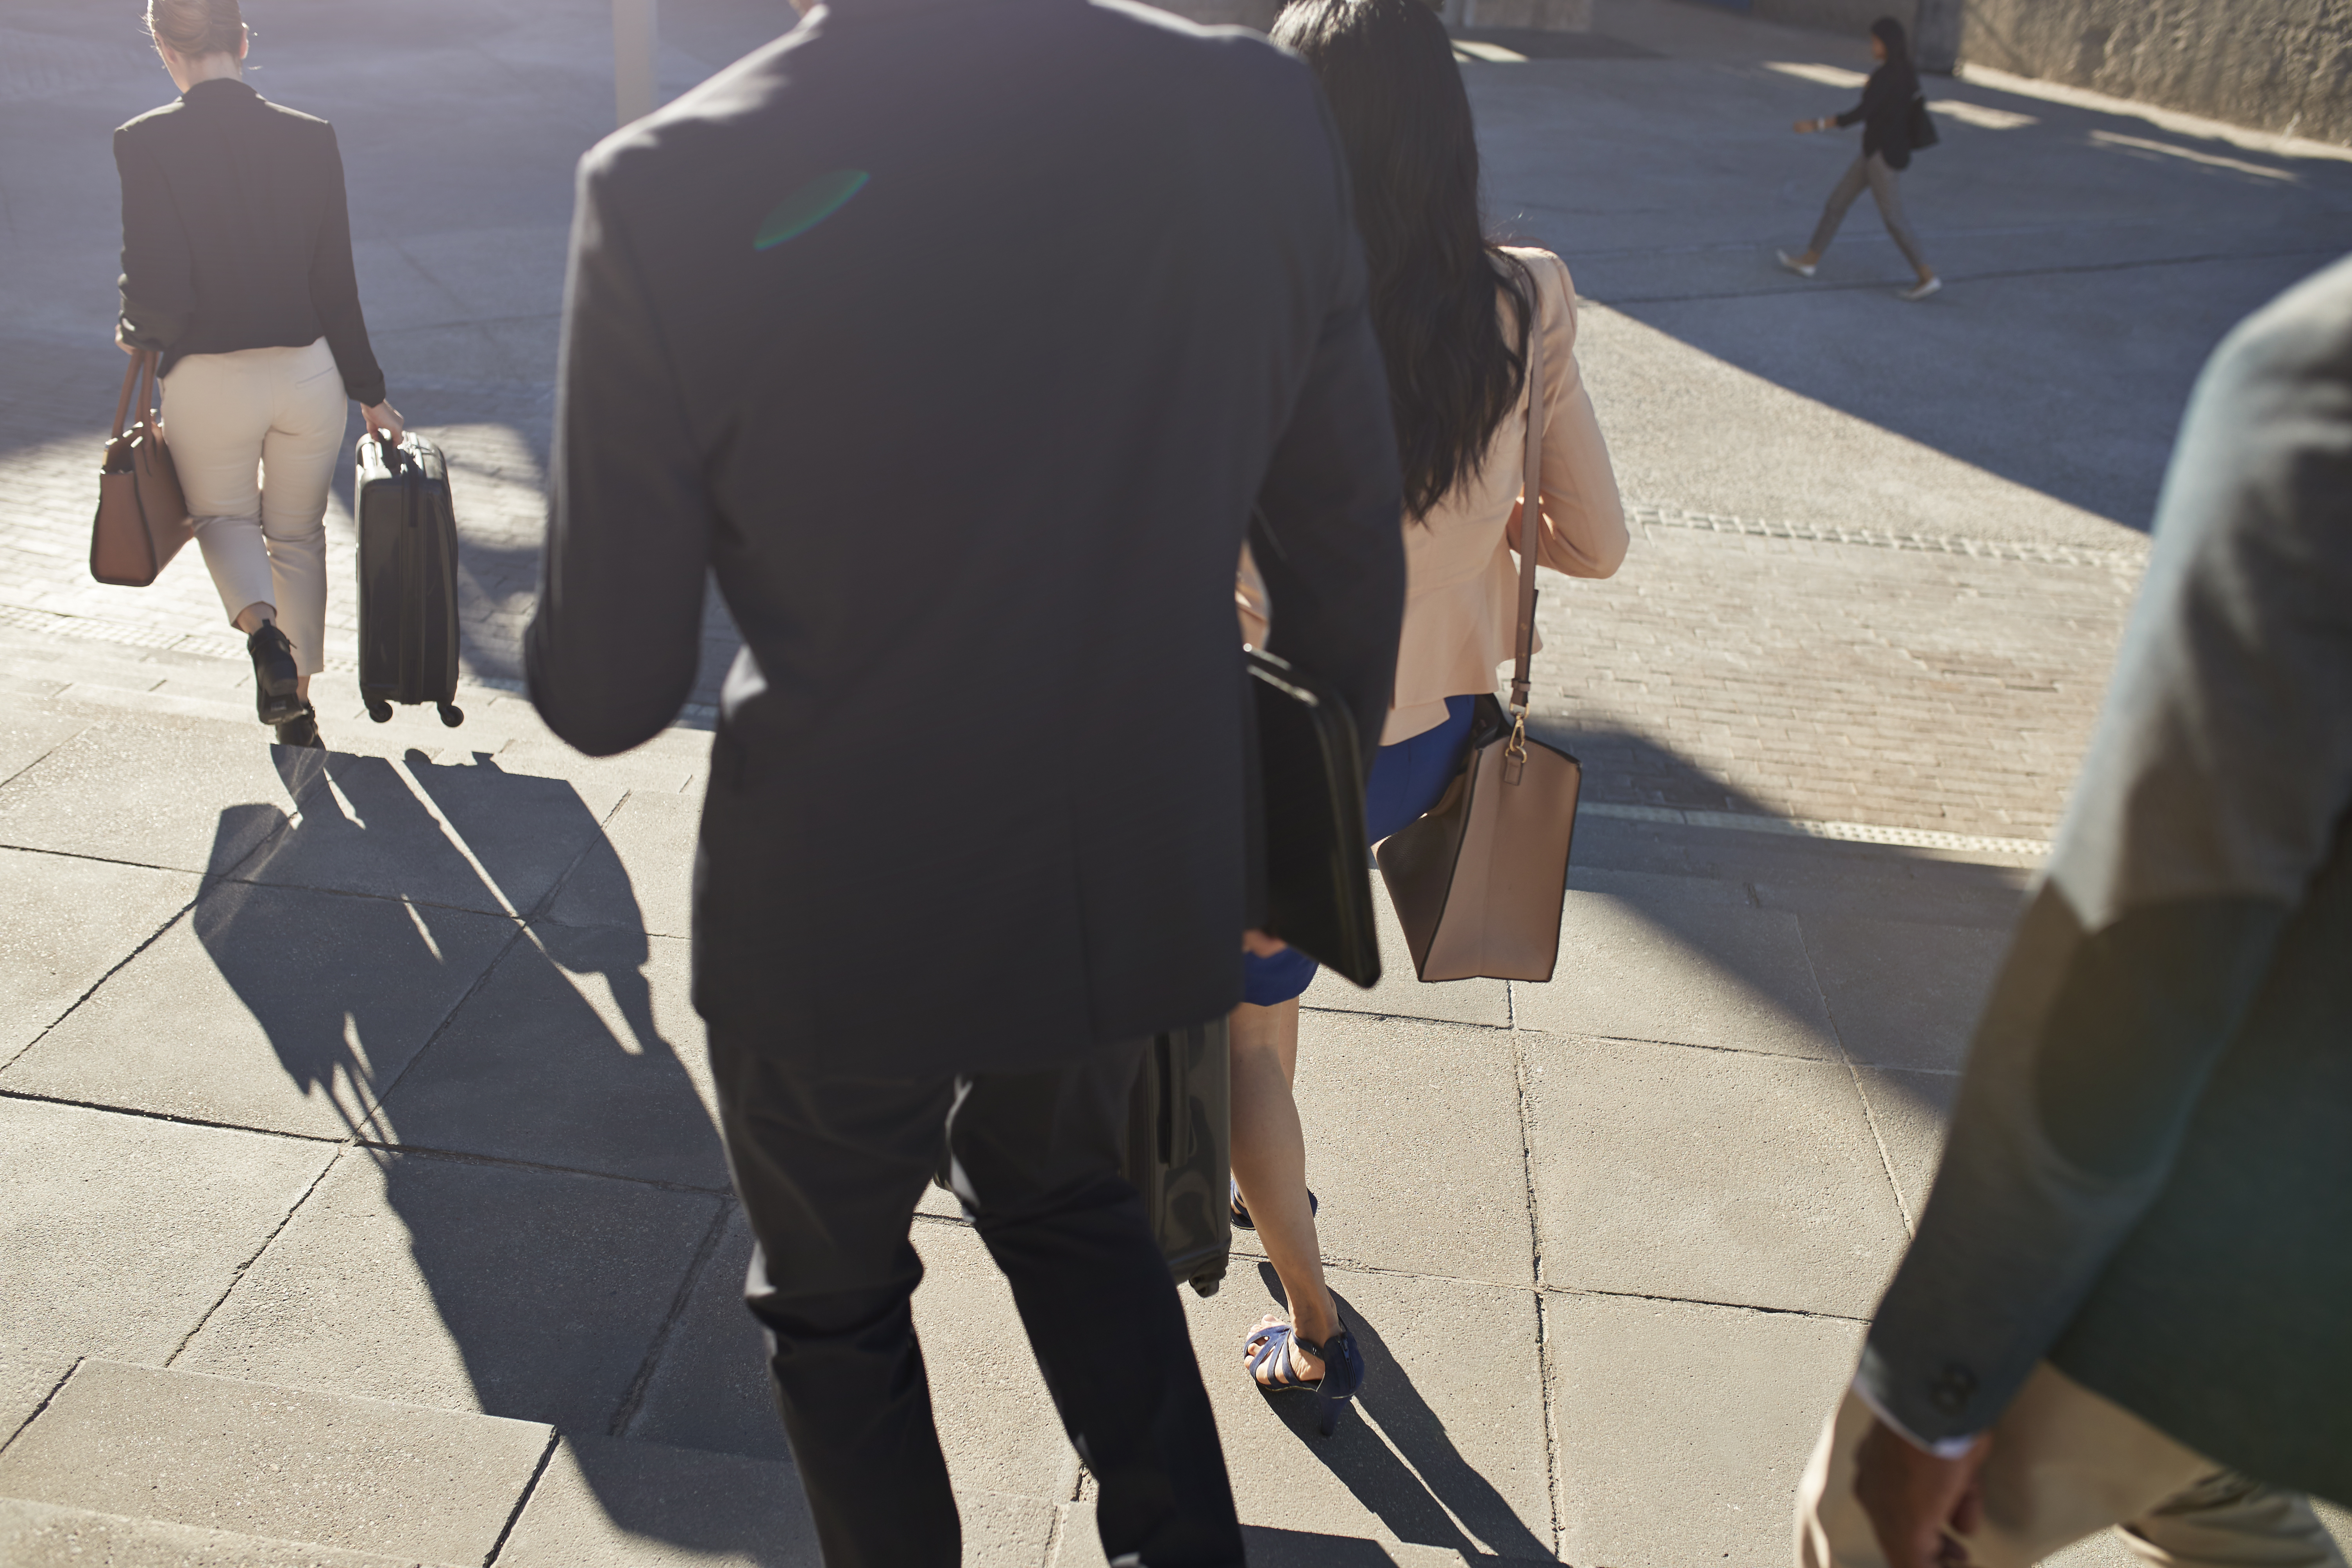 Businesspeople walking on staircase with bags